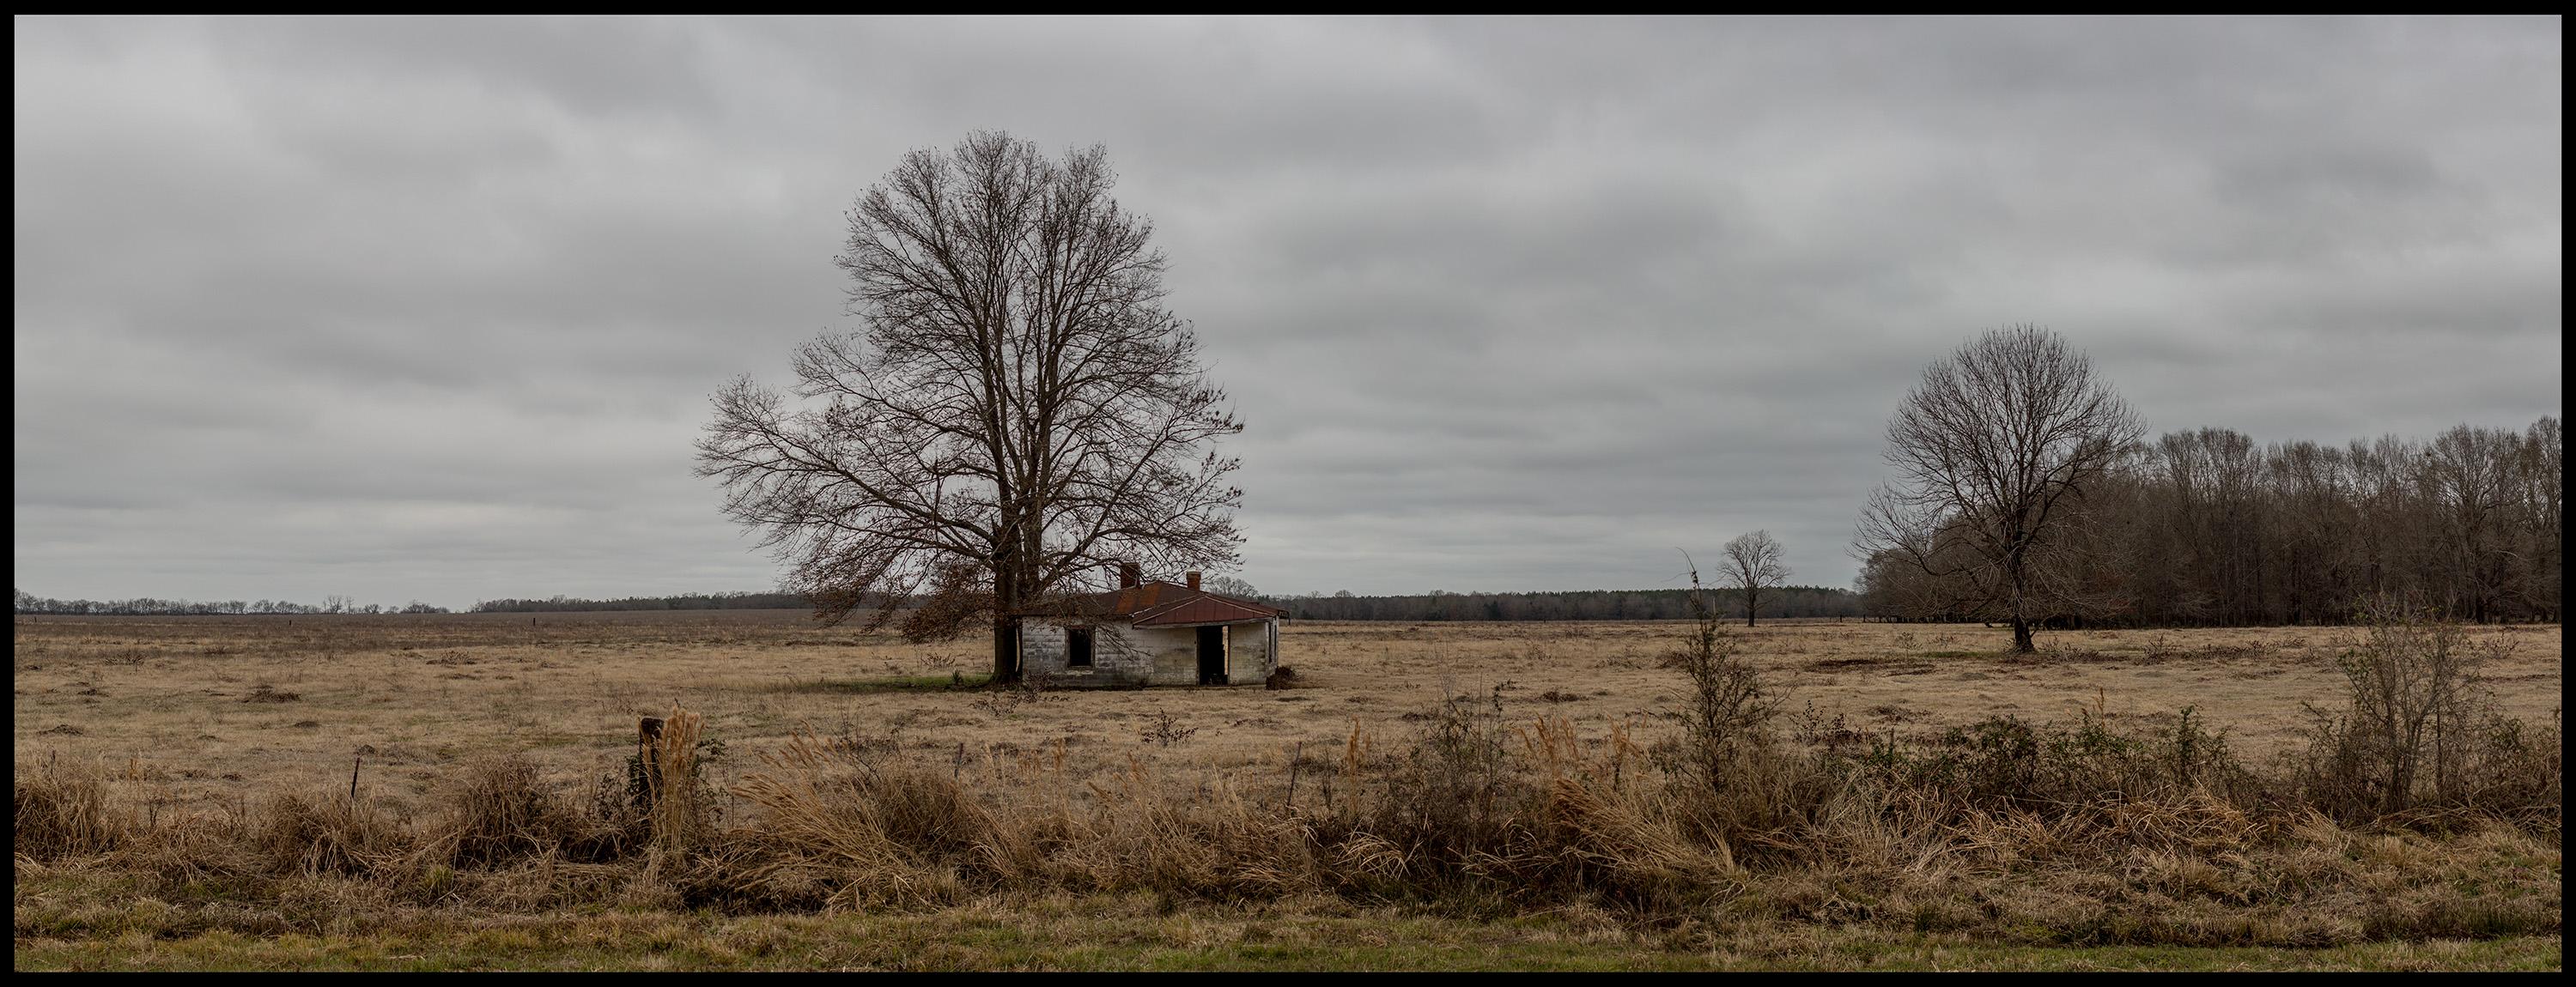 Jerry Siegel Landscape Photograph – „HWY 80, House & Tree, Dallas County, AL“ – Southern Photography – Christenberry